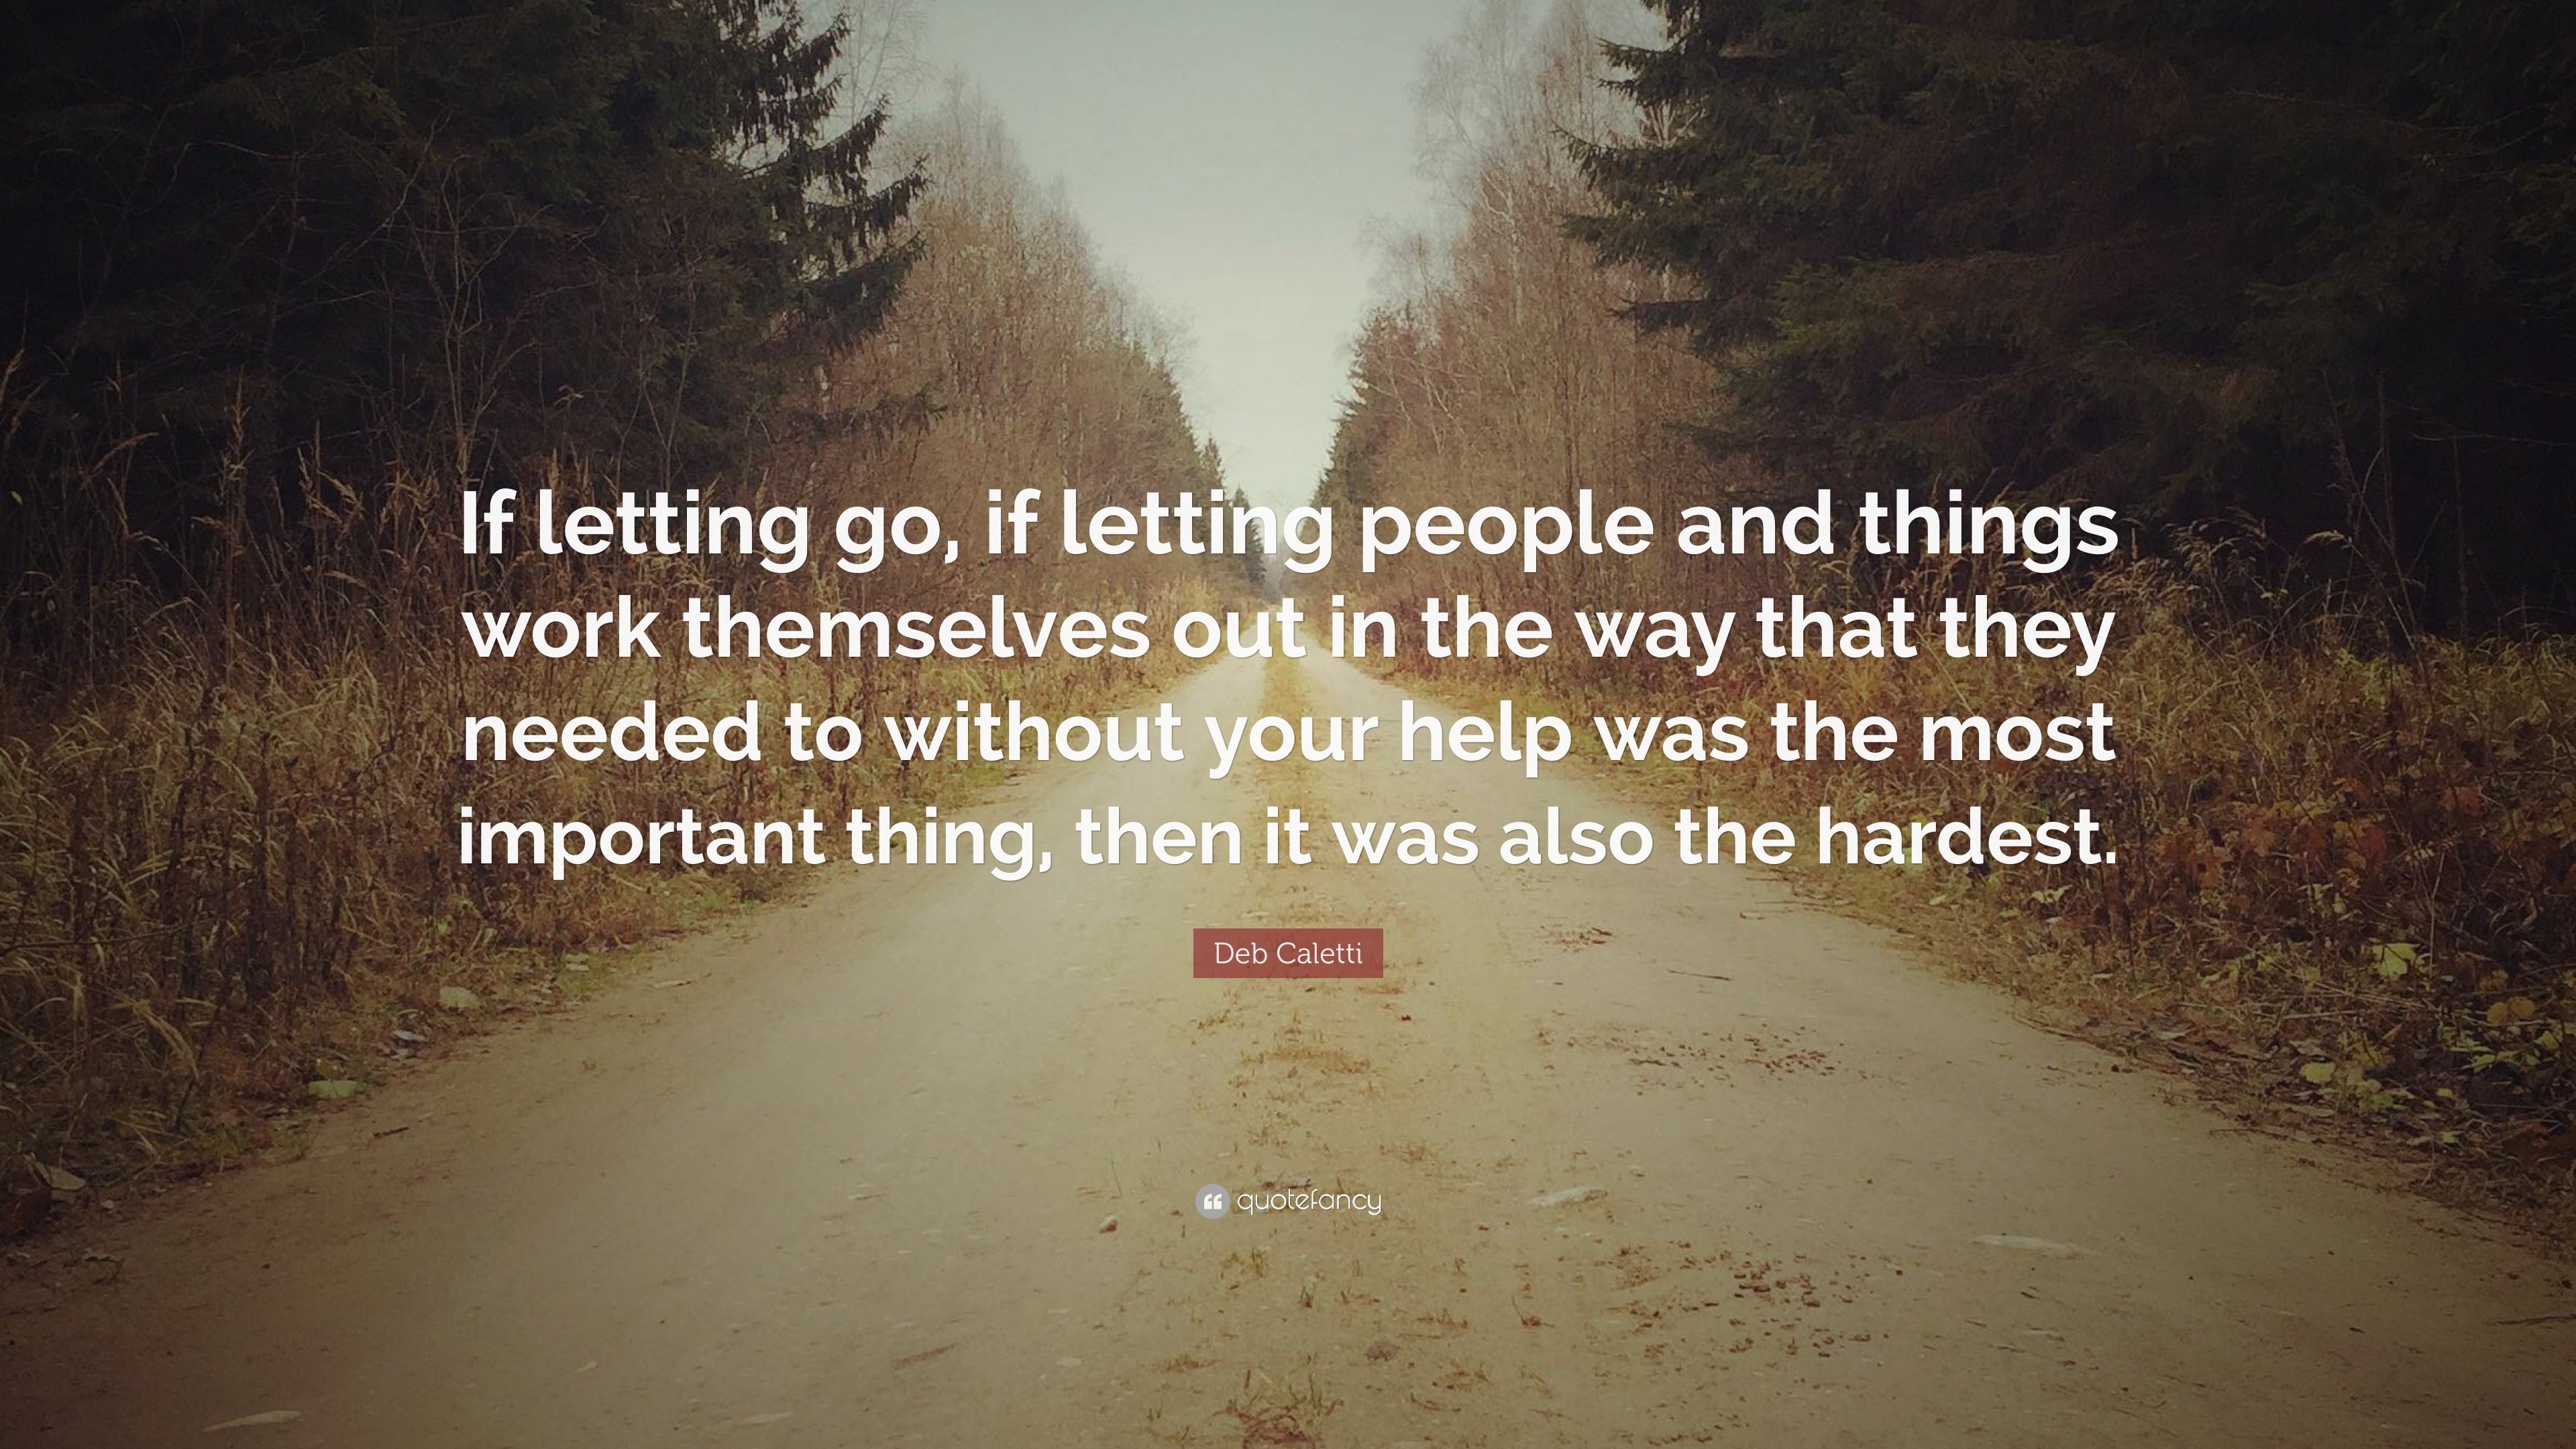 Deb Caletti Quote: “If letting go, if letting people and things work ...